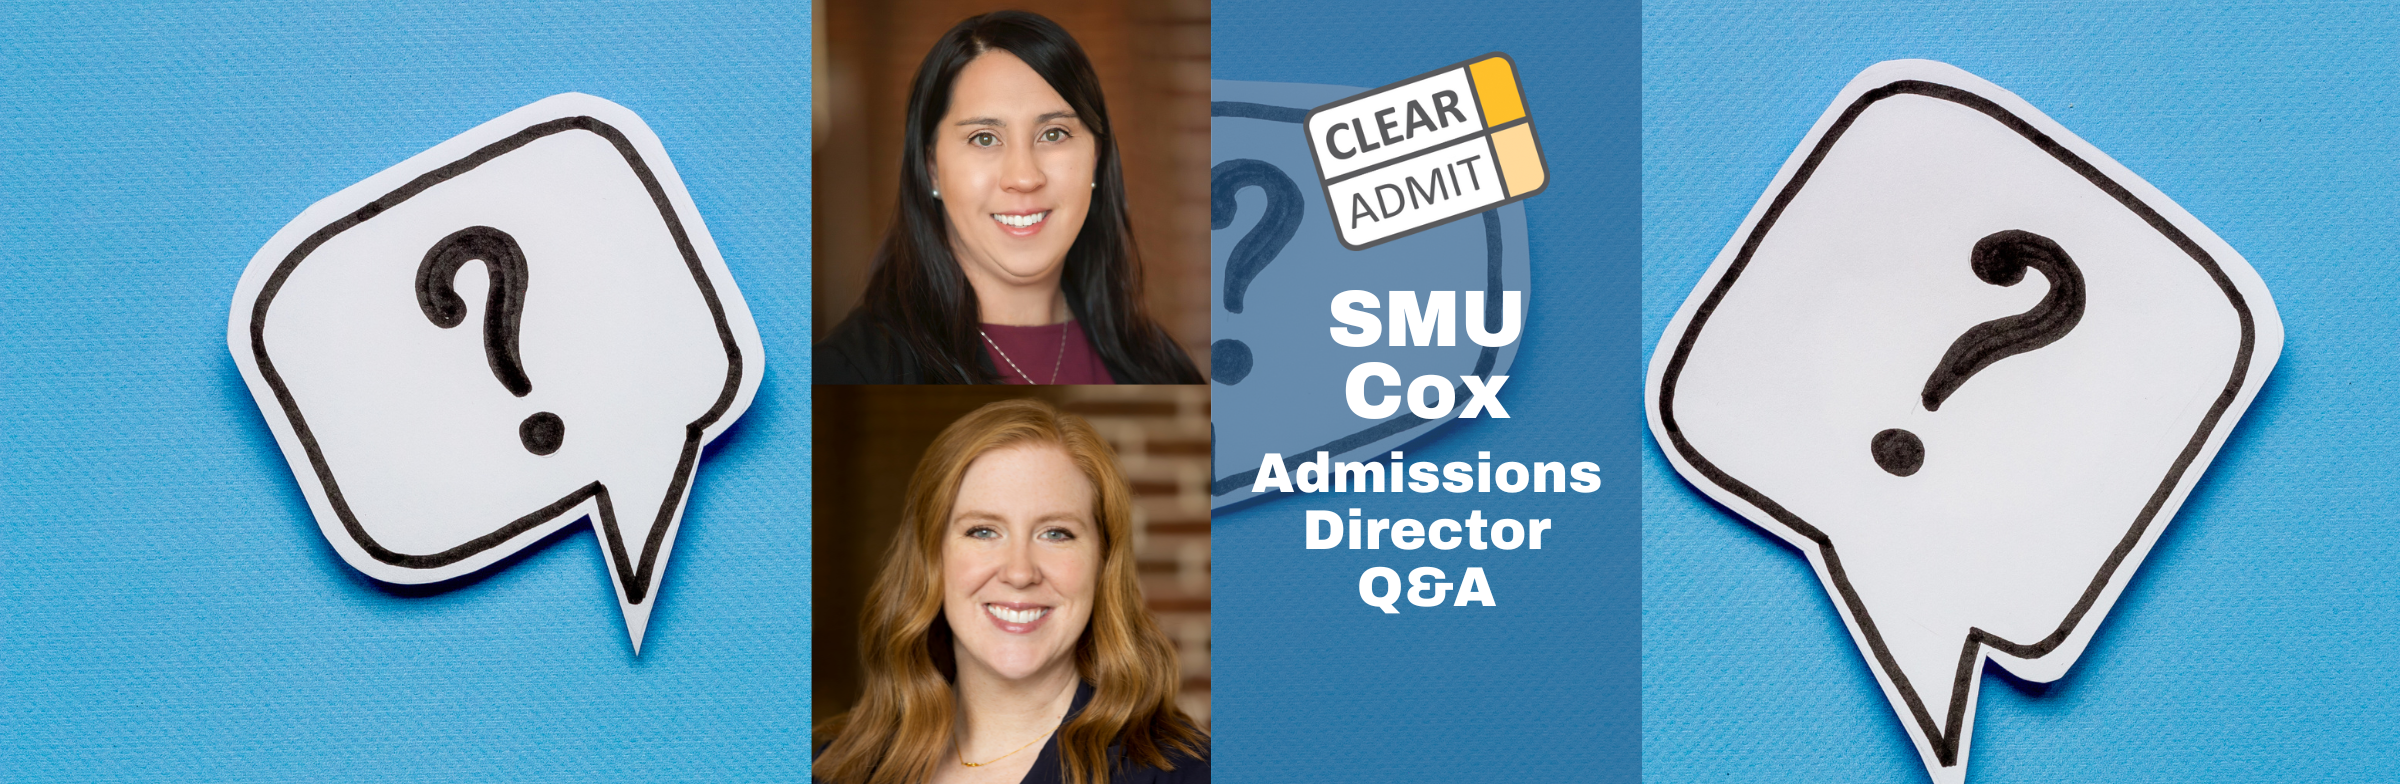 Image for Admissions Director Q&A: Debbie Macedonia & Jessica Lunce of SMU Cox